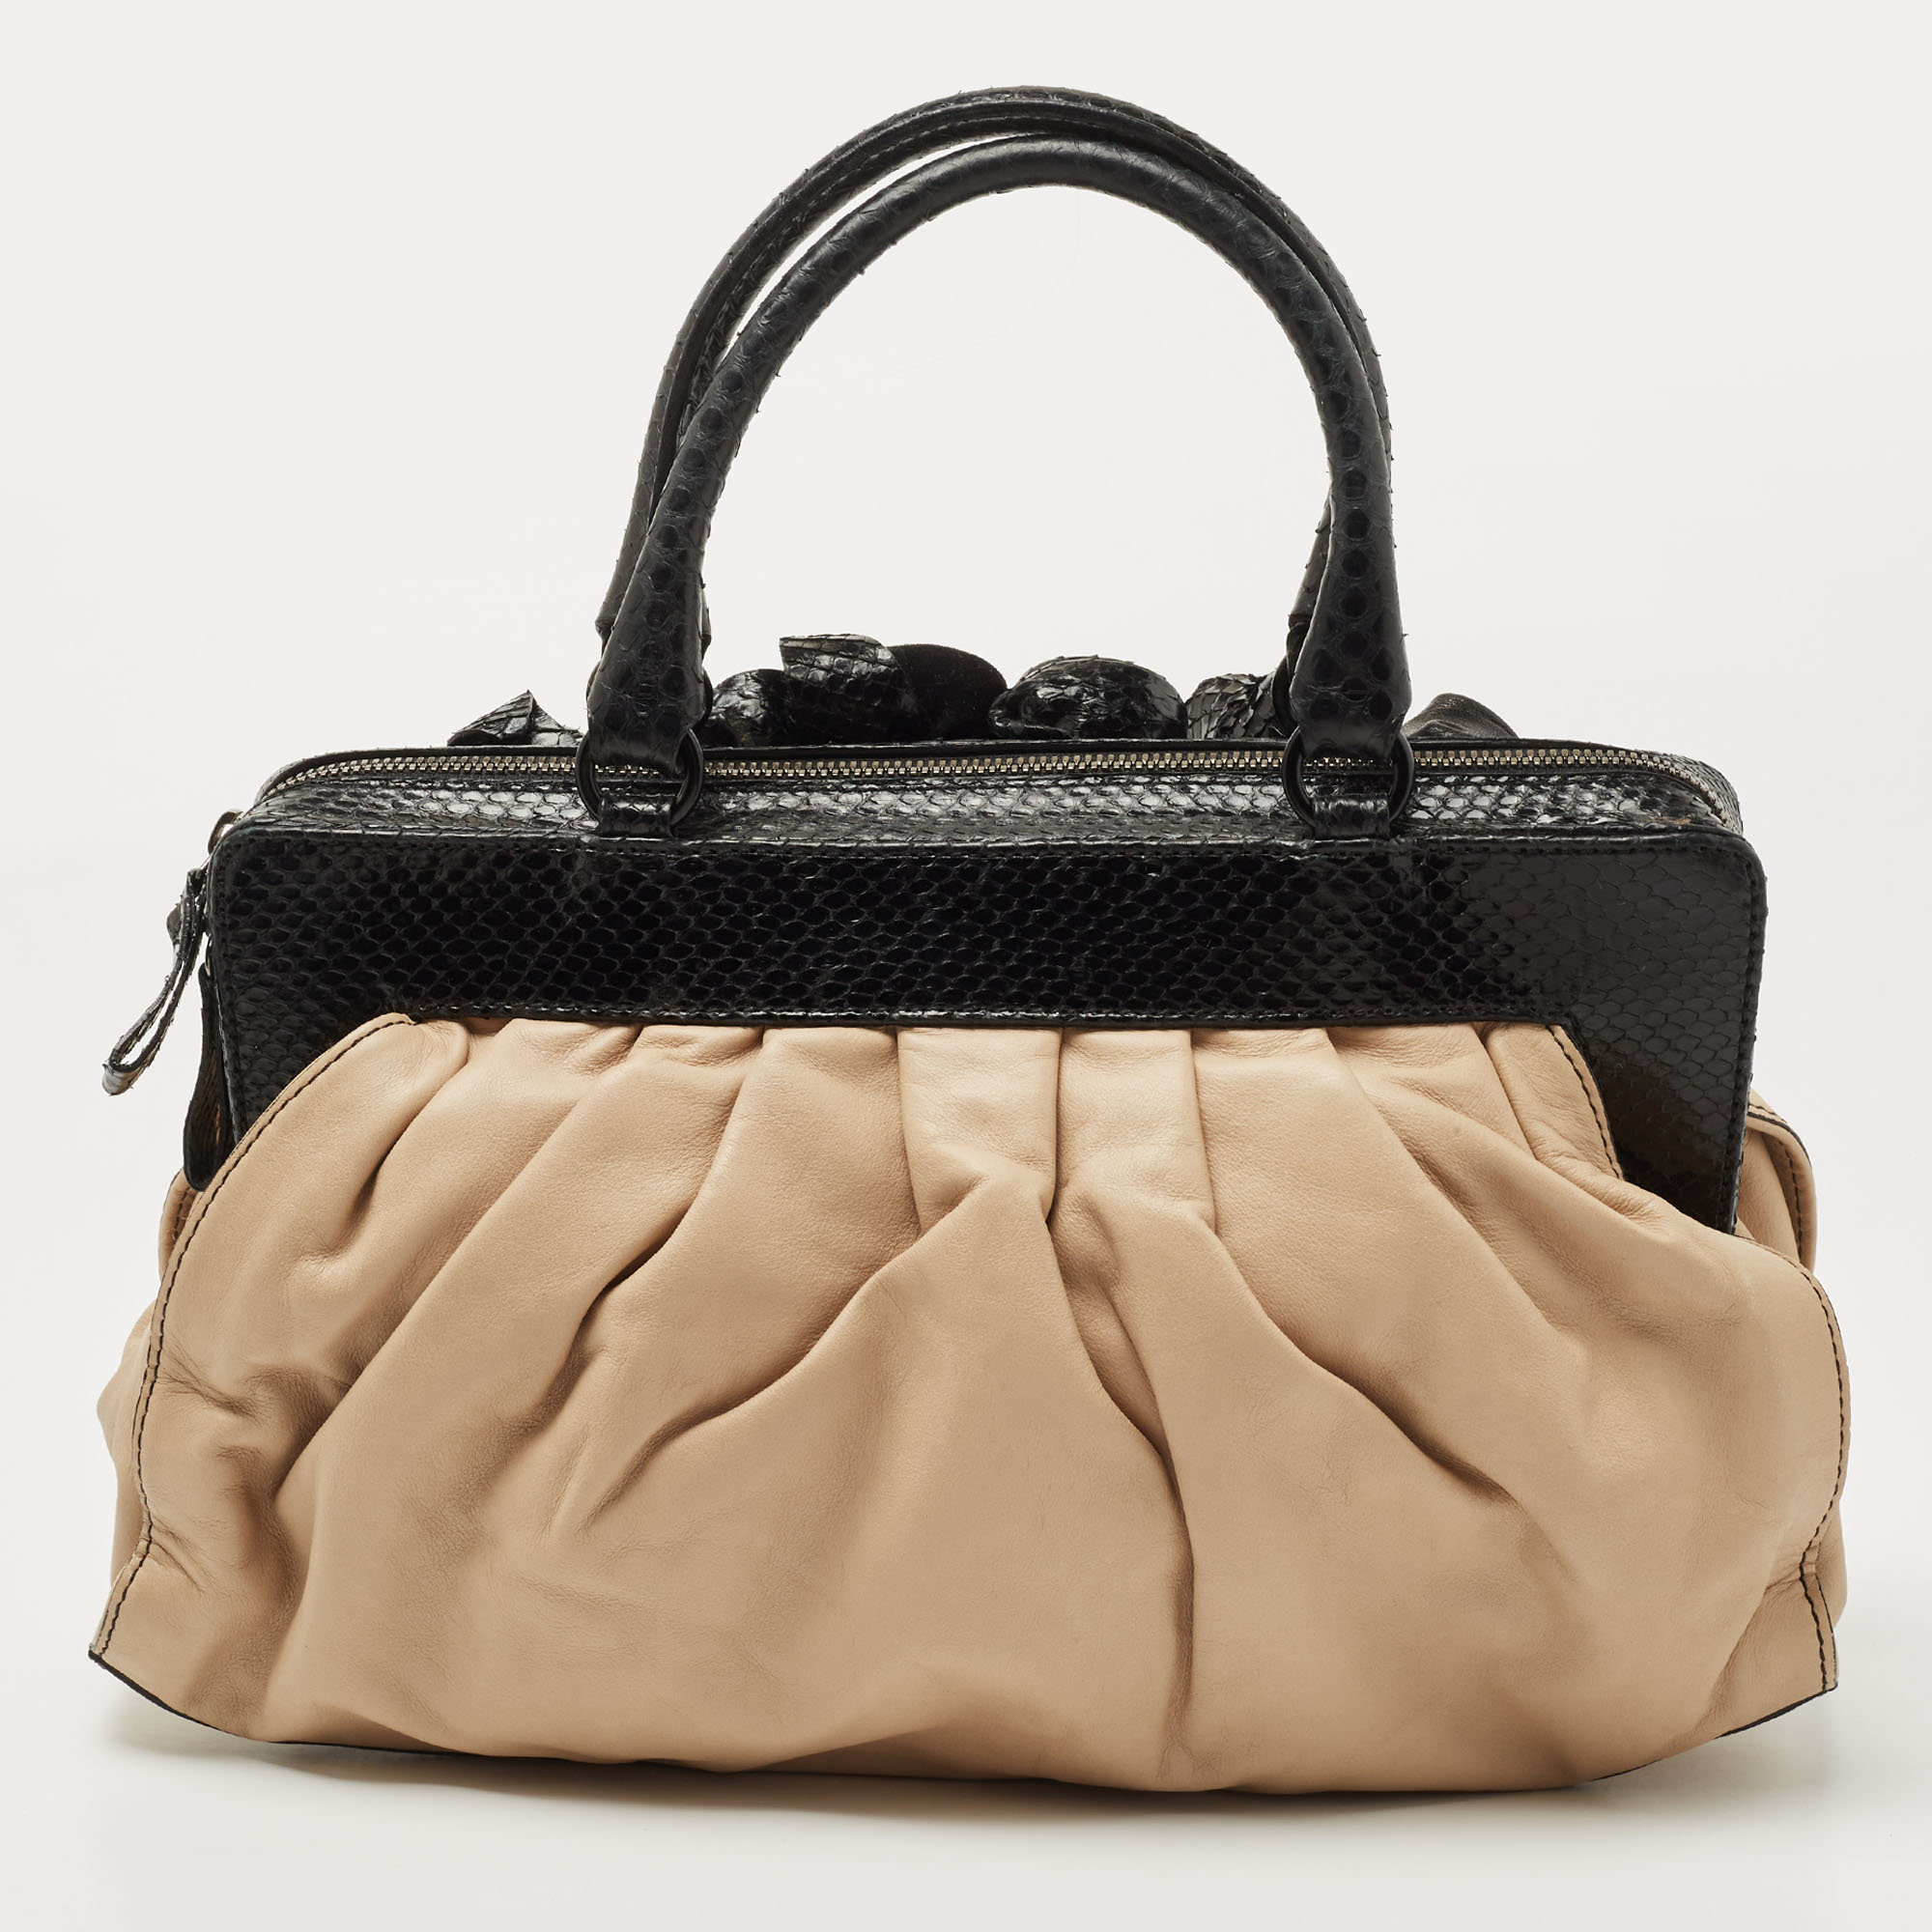 Valentino Beige/Black Leather And Watersnake Lacca Fleur Frame Satchel